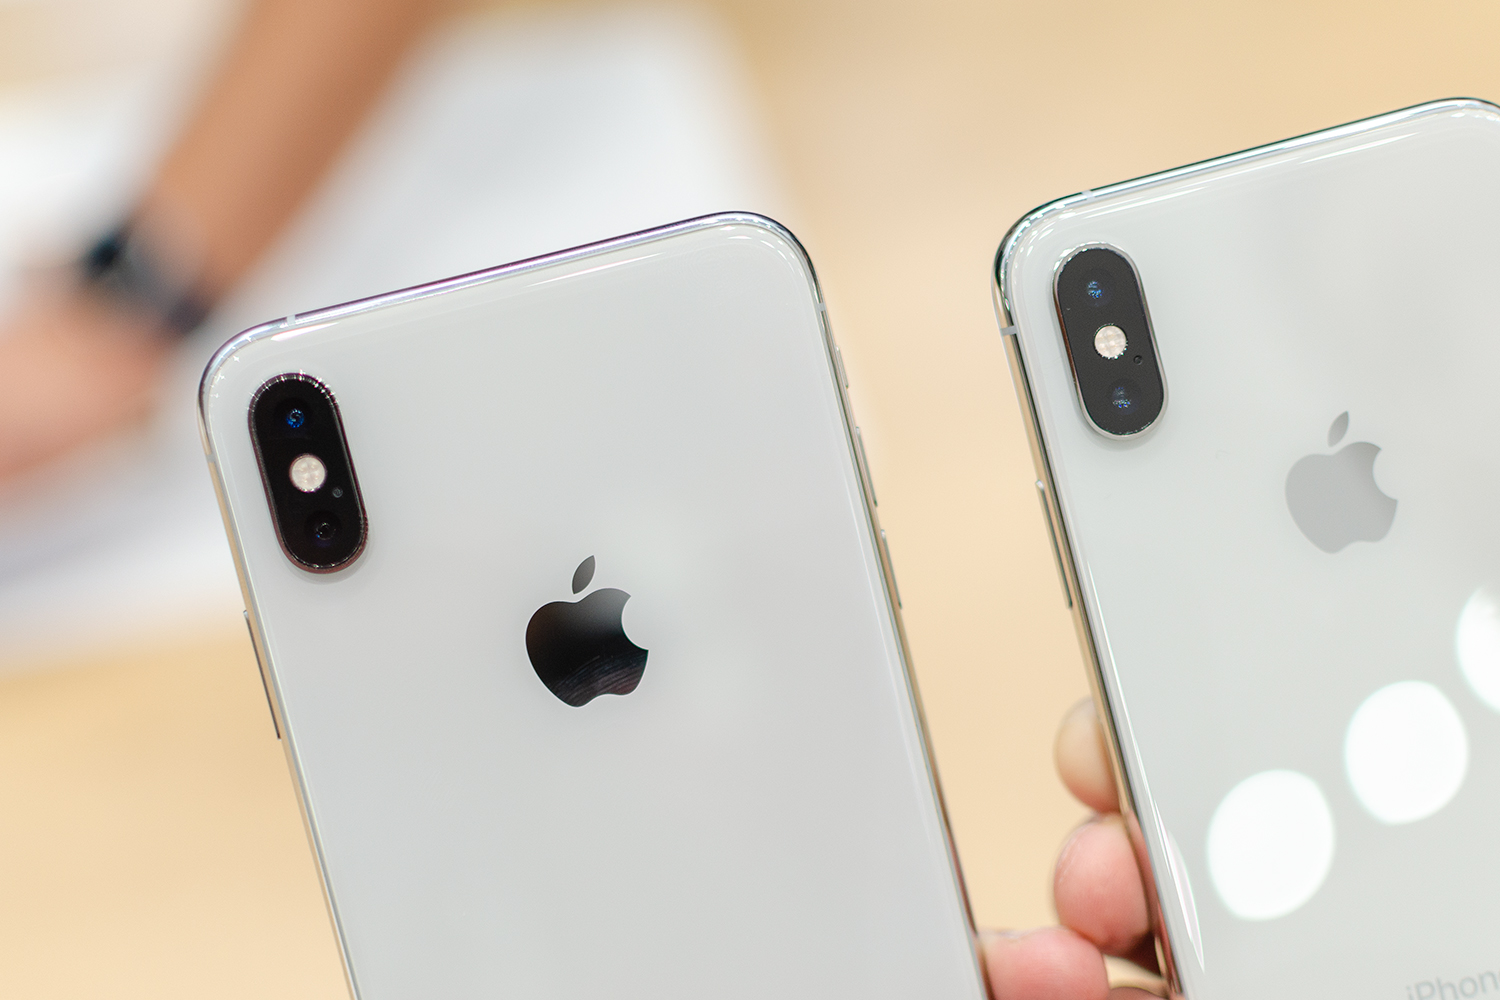 iPhone XS, XS Max, XR: Specs, Features, Price, Release Date, and More